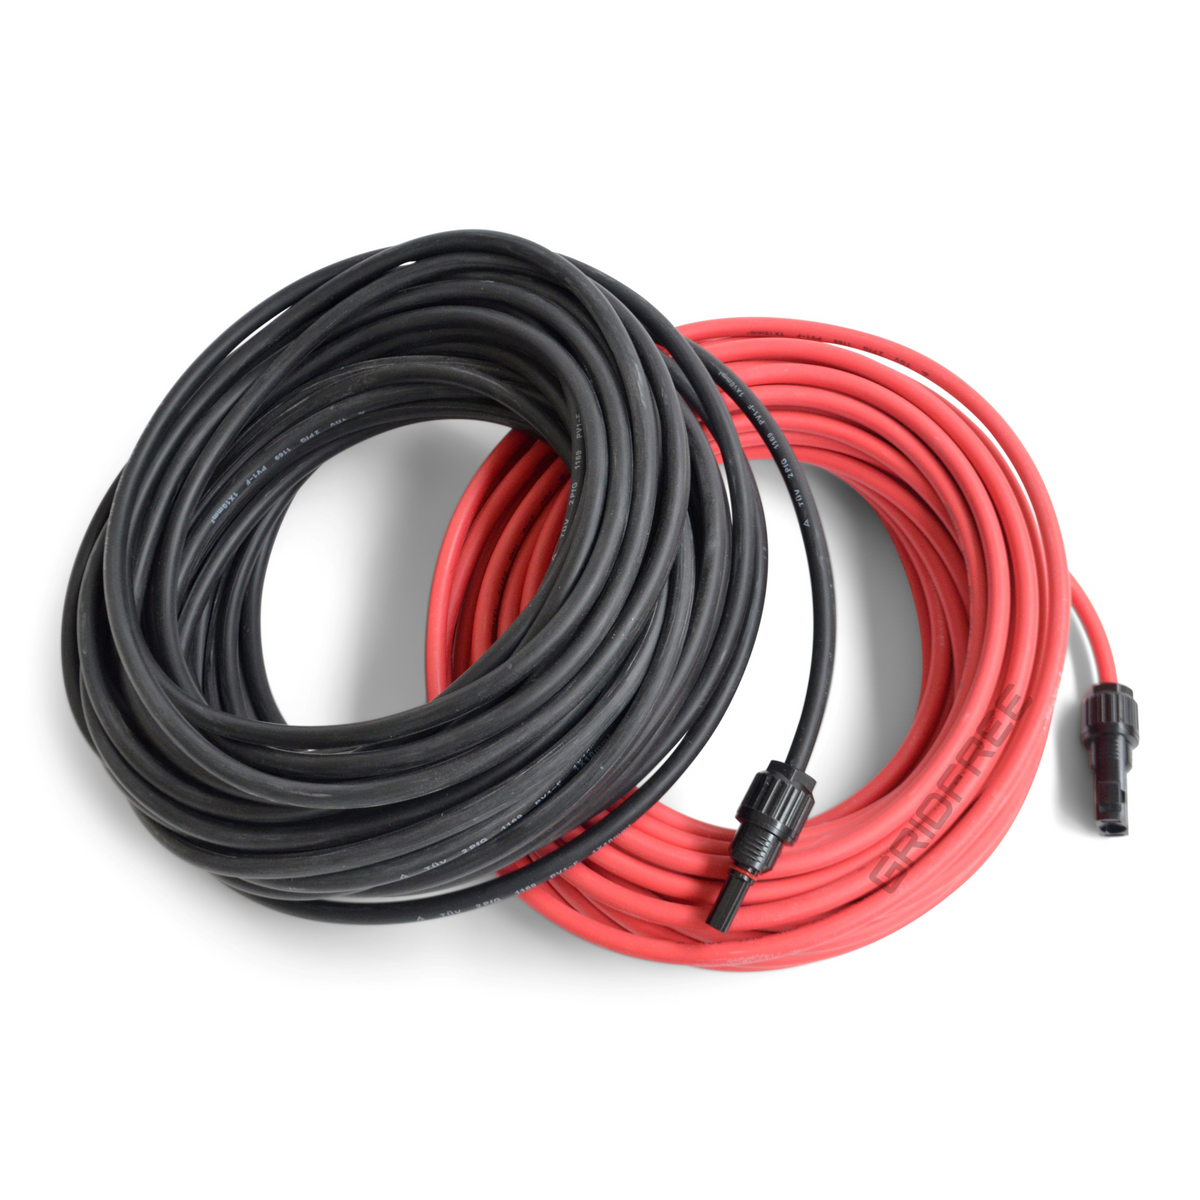 10mm² PV cable x 20m (Red & Black) - MC4 Included